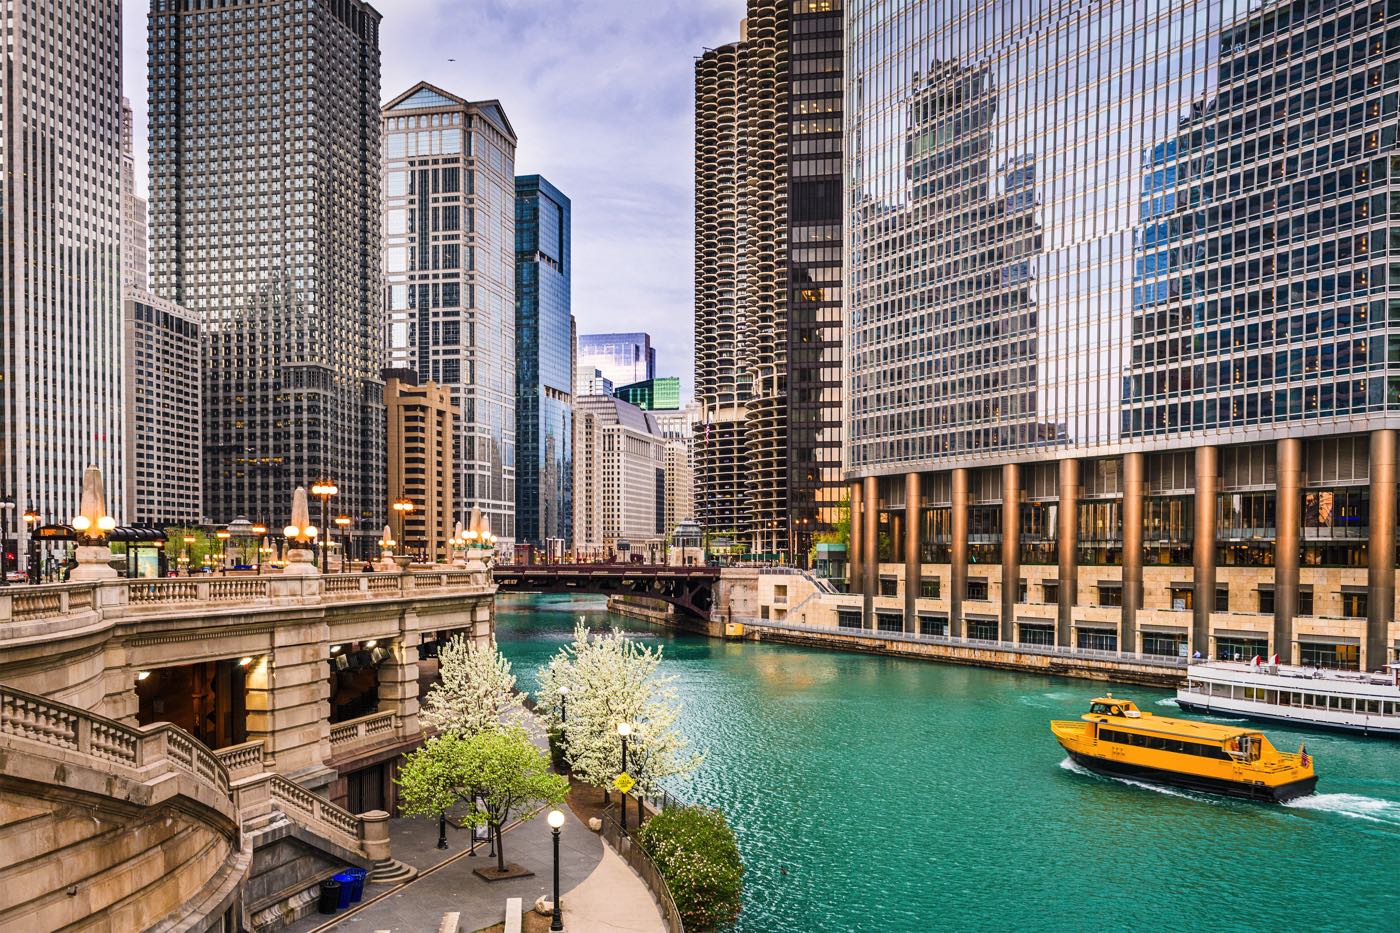 39 PHENOMENAL AND FREE THINGS TO DO IN CHICAGO